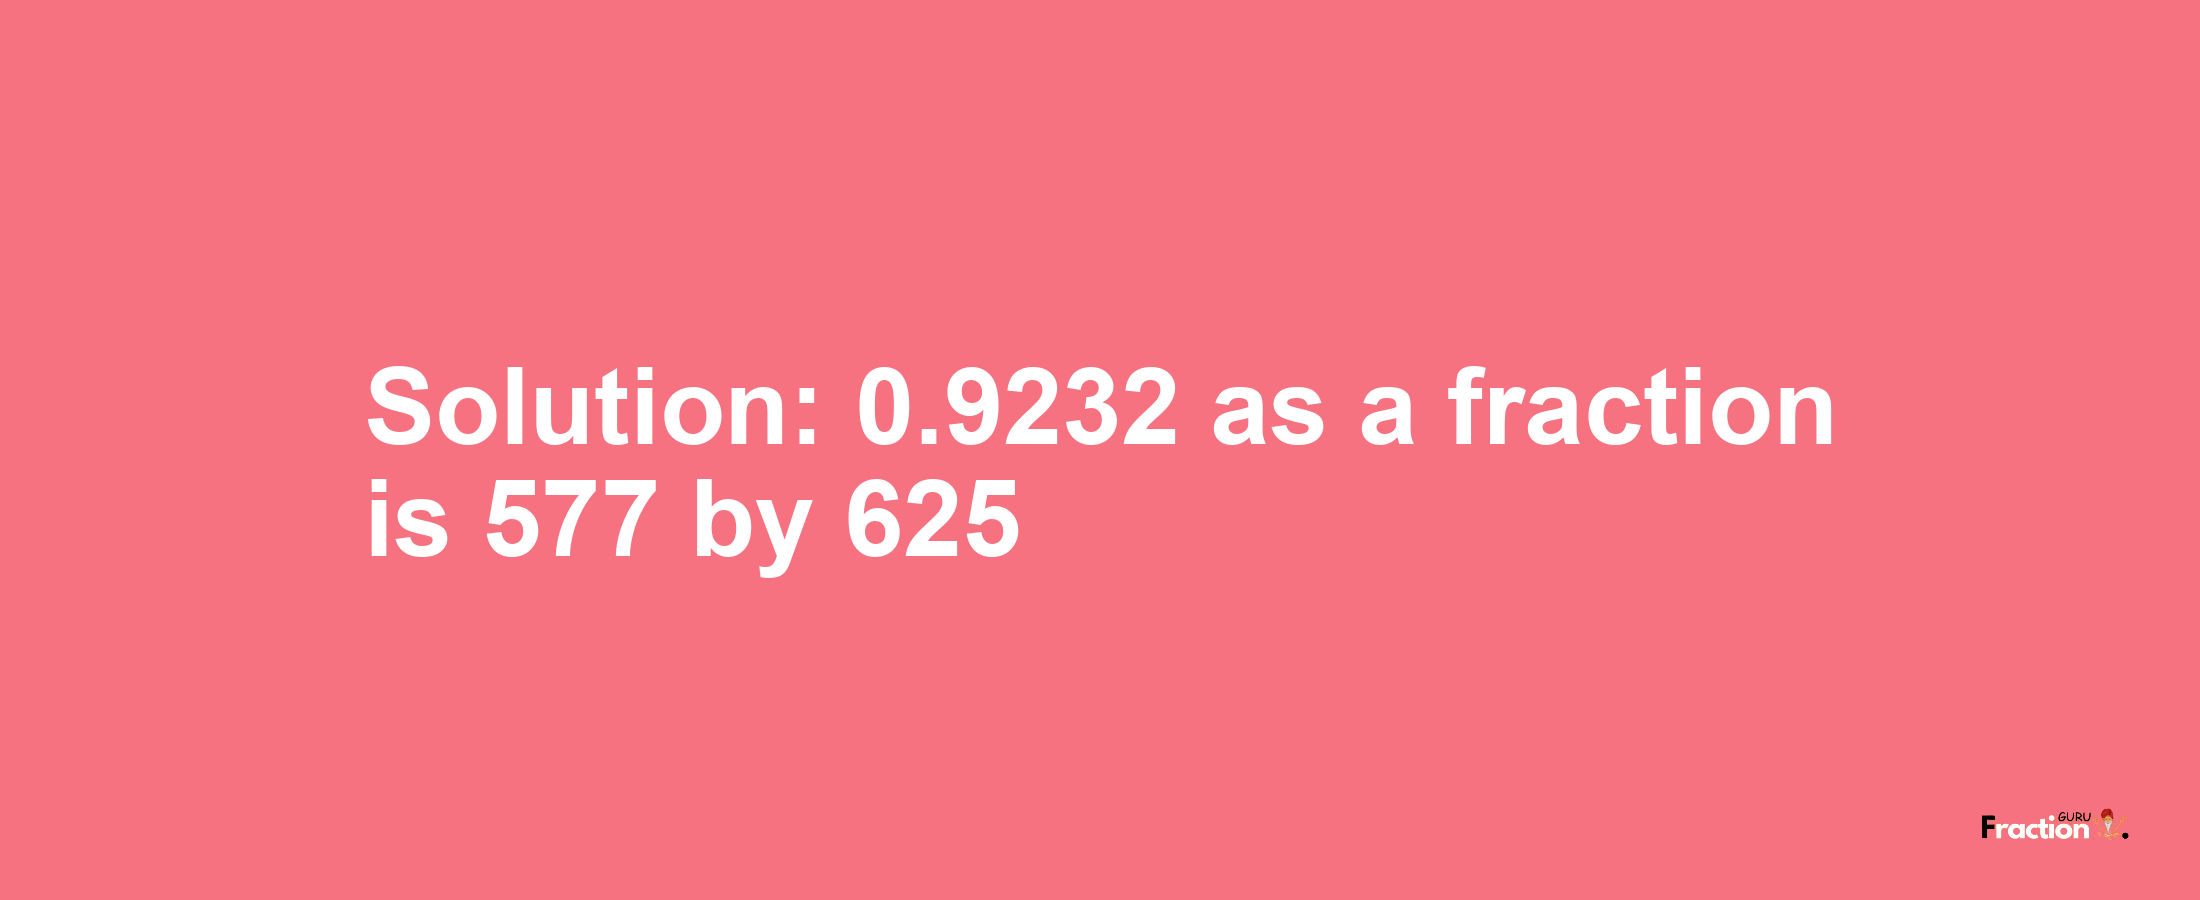 Solution:0.9232 as a fraction is 577/625